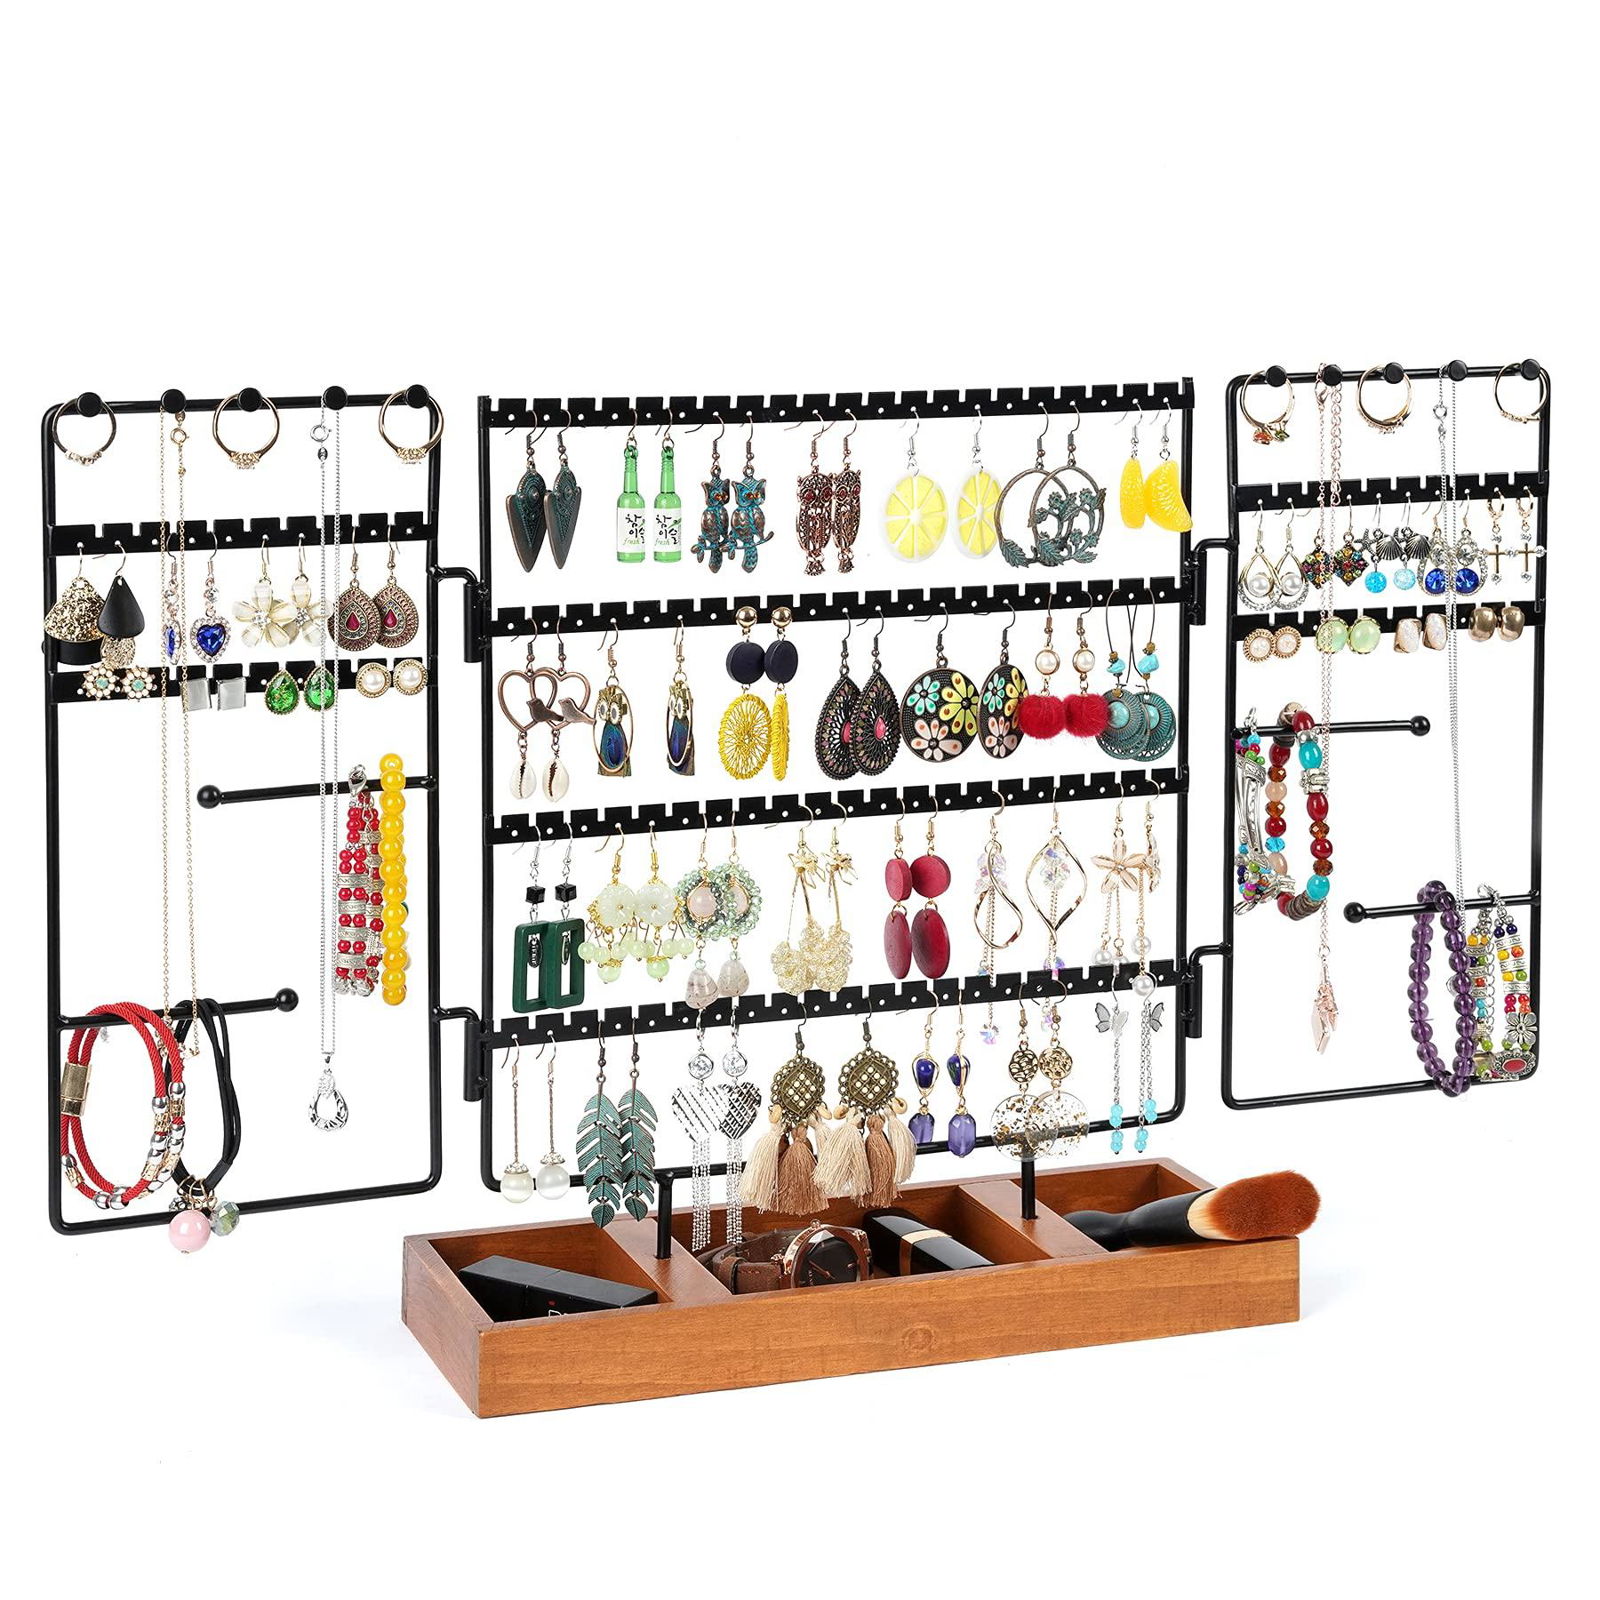 JEWELRY STAND EARRING STAND EARRING ORGANIZER EARRING HOLDER JEWELRY ORGANIZER H 3